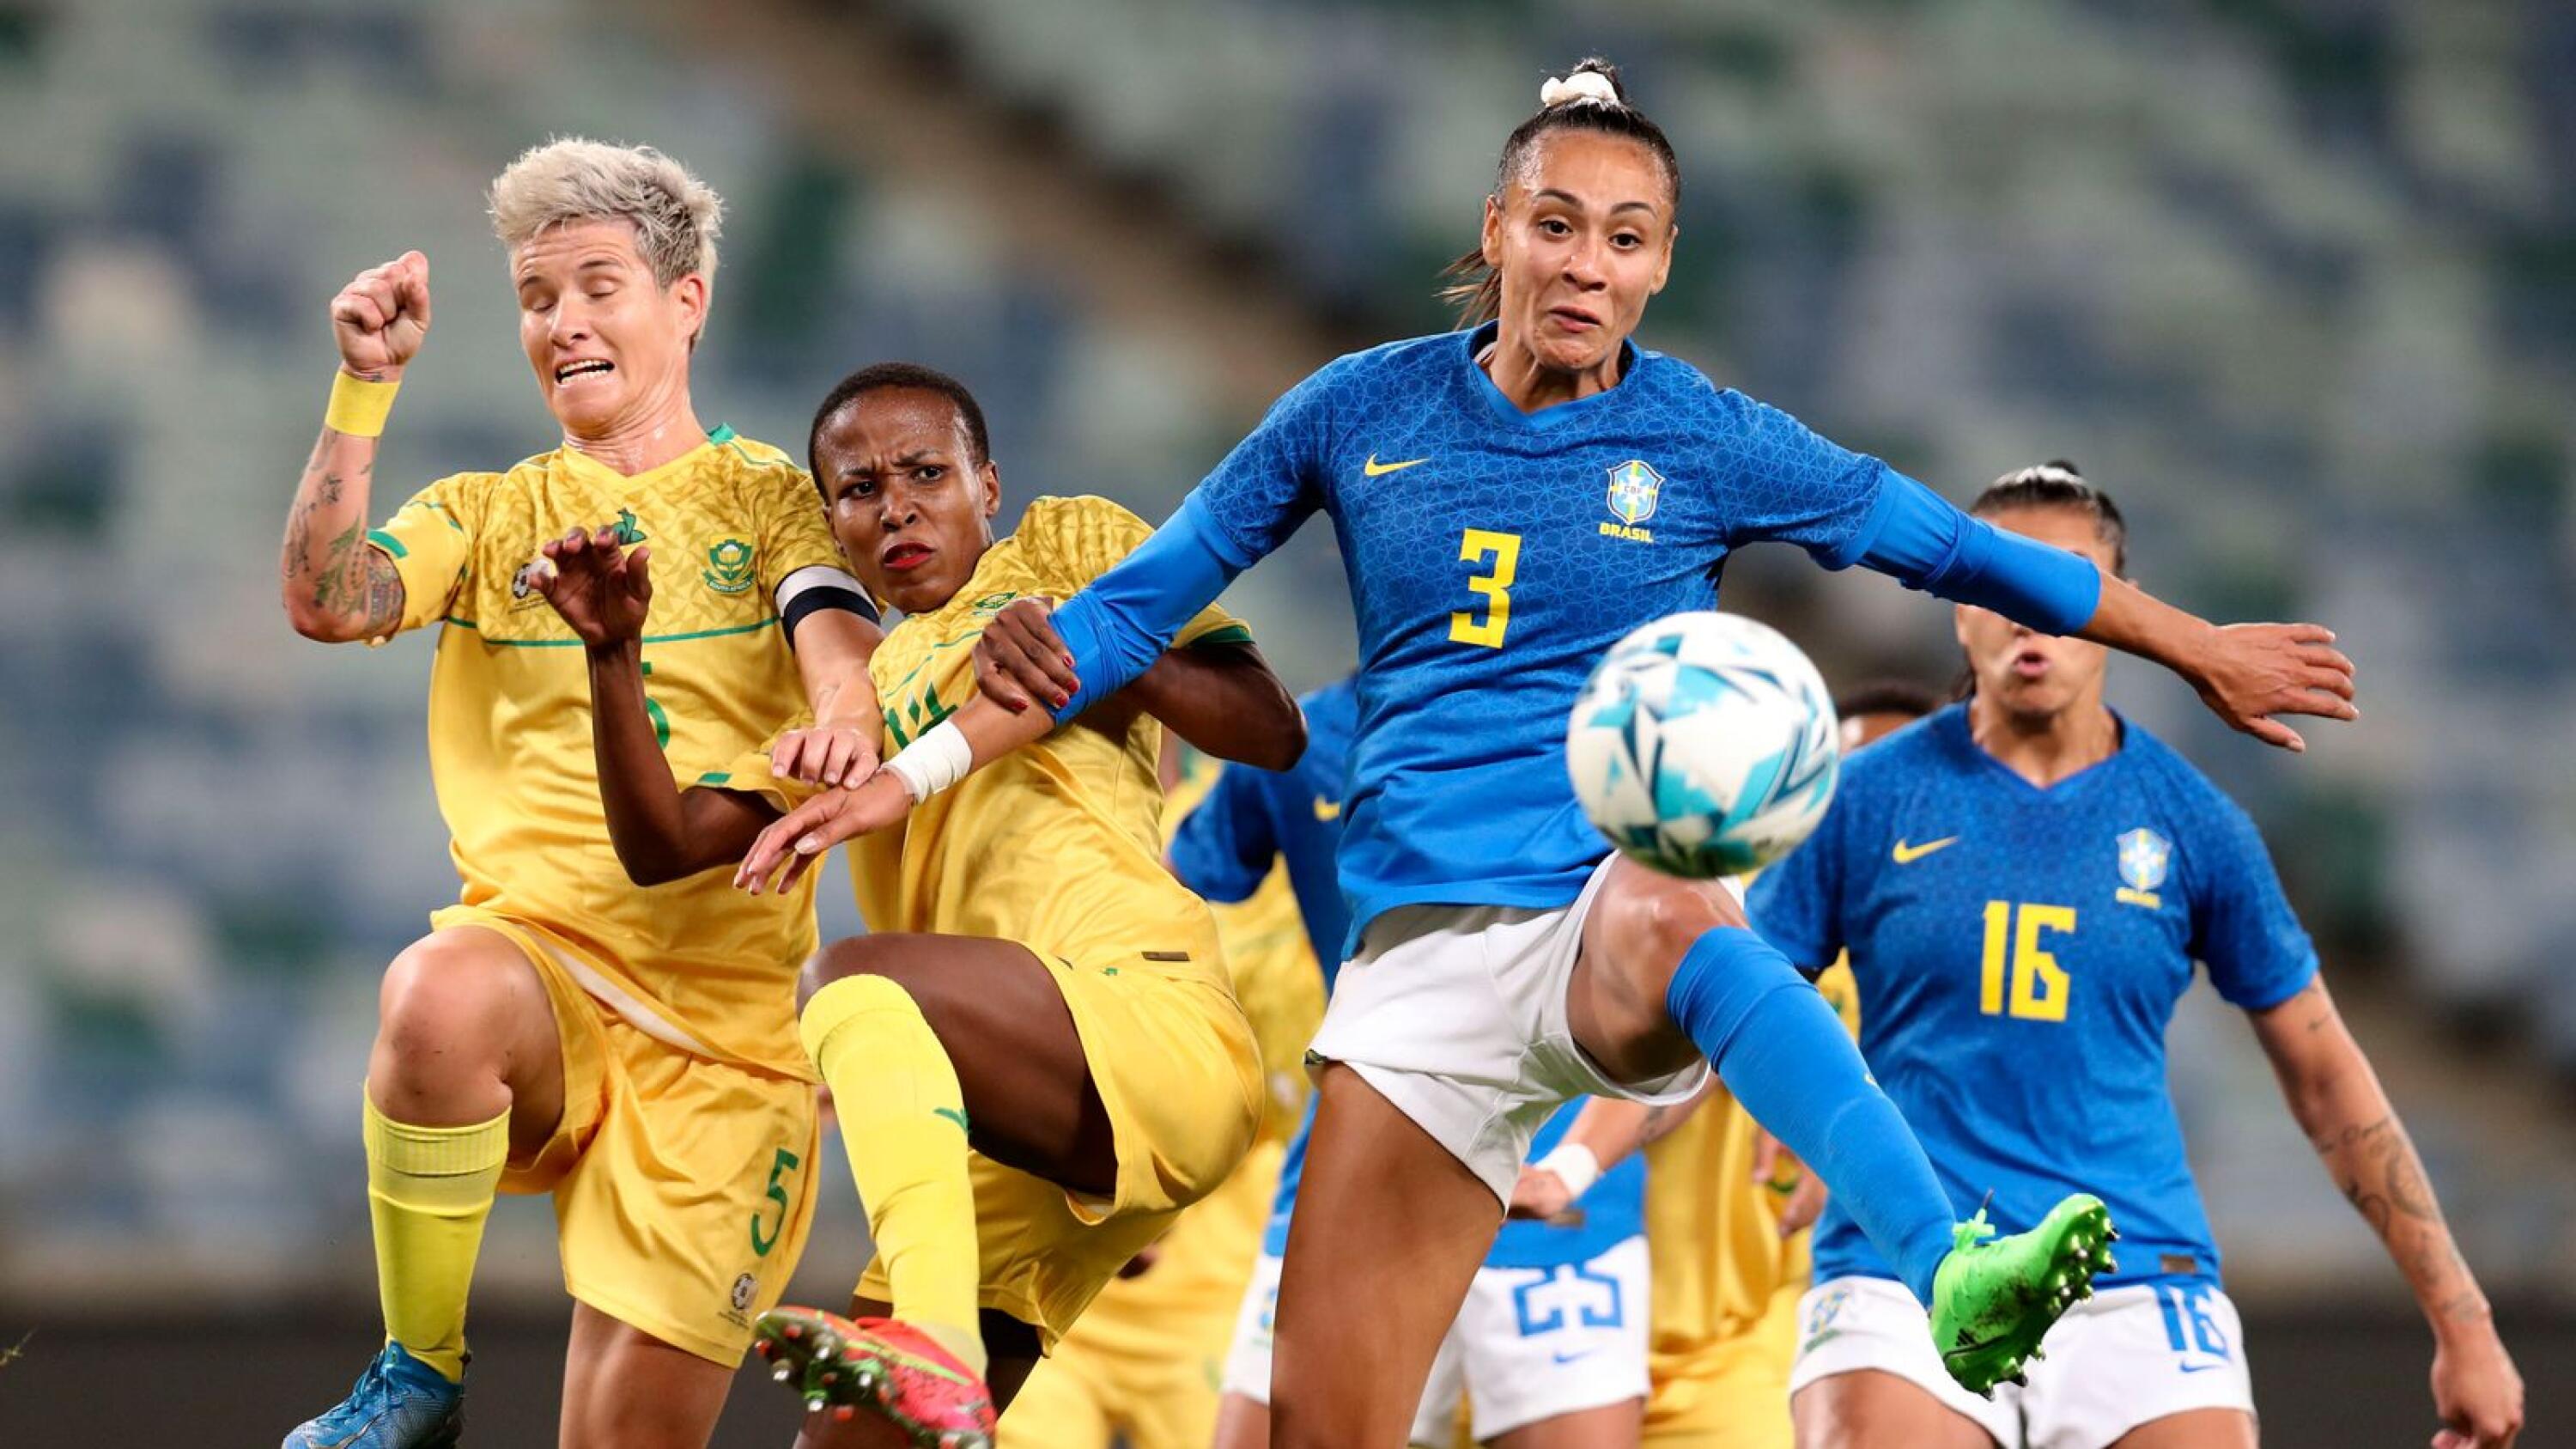 Kathellen of Brazil is challenged by Janine van Wyk and Nomvula Kgoale of SA at Moses Mabhida Stadium on Monday.